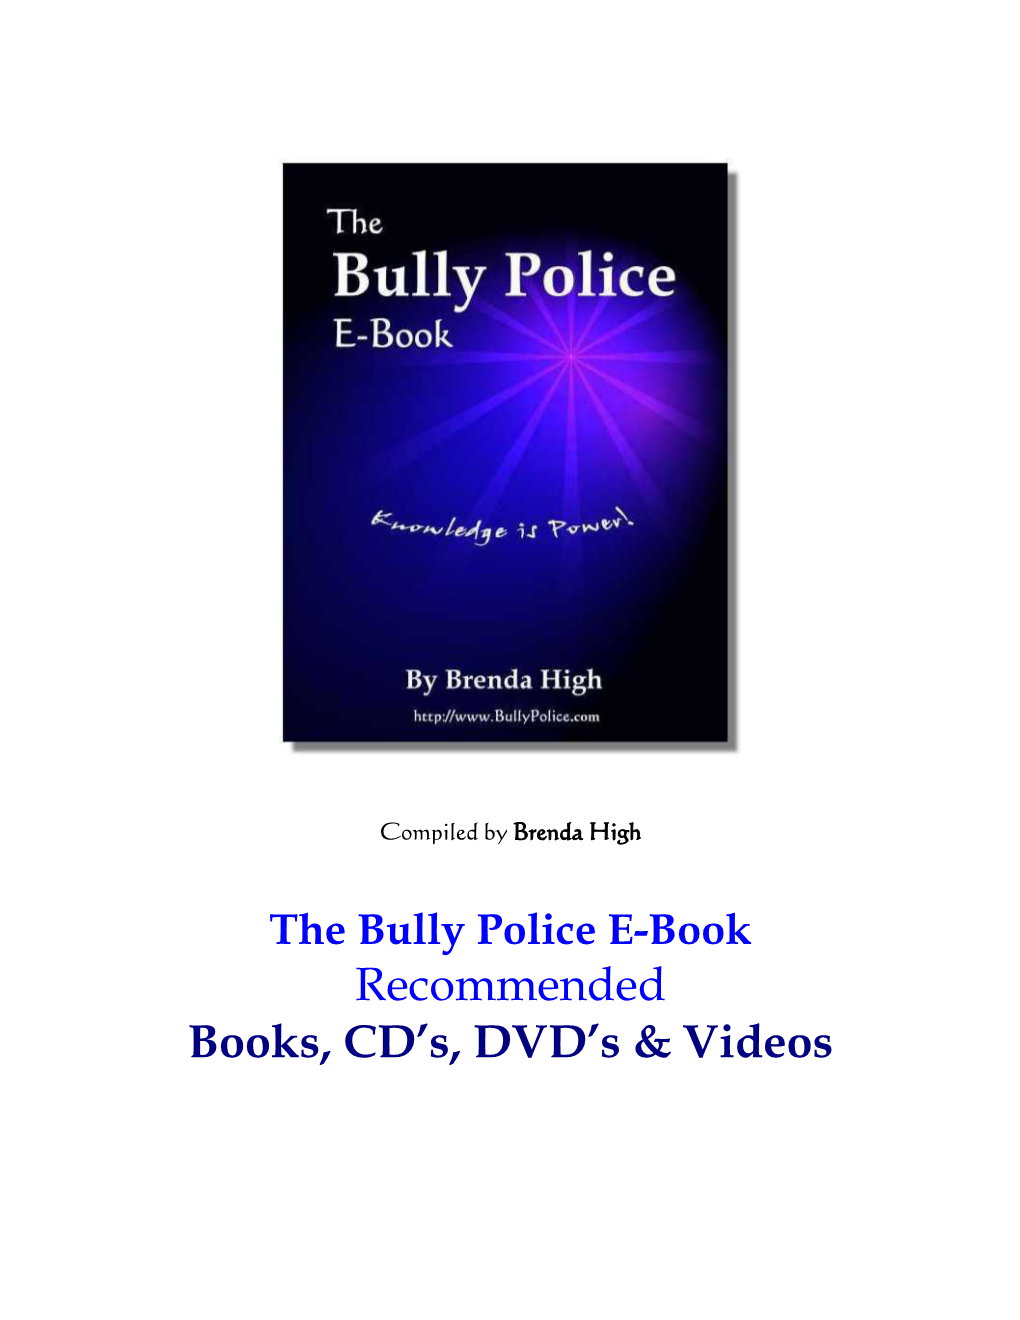 Recommended Books, CD's, DVD's & Videos